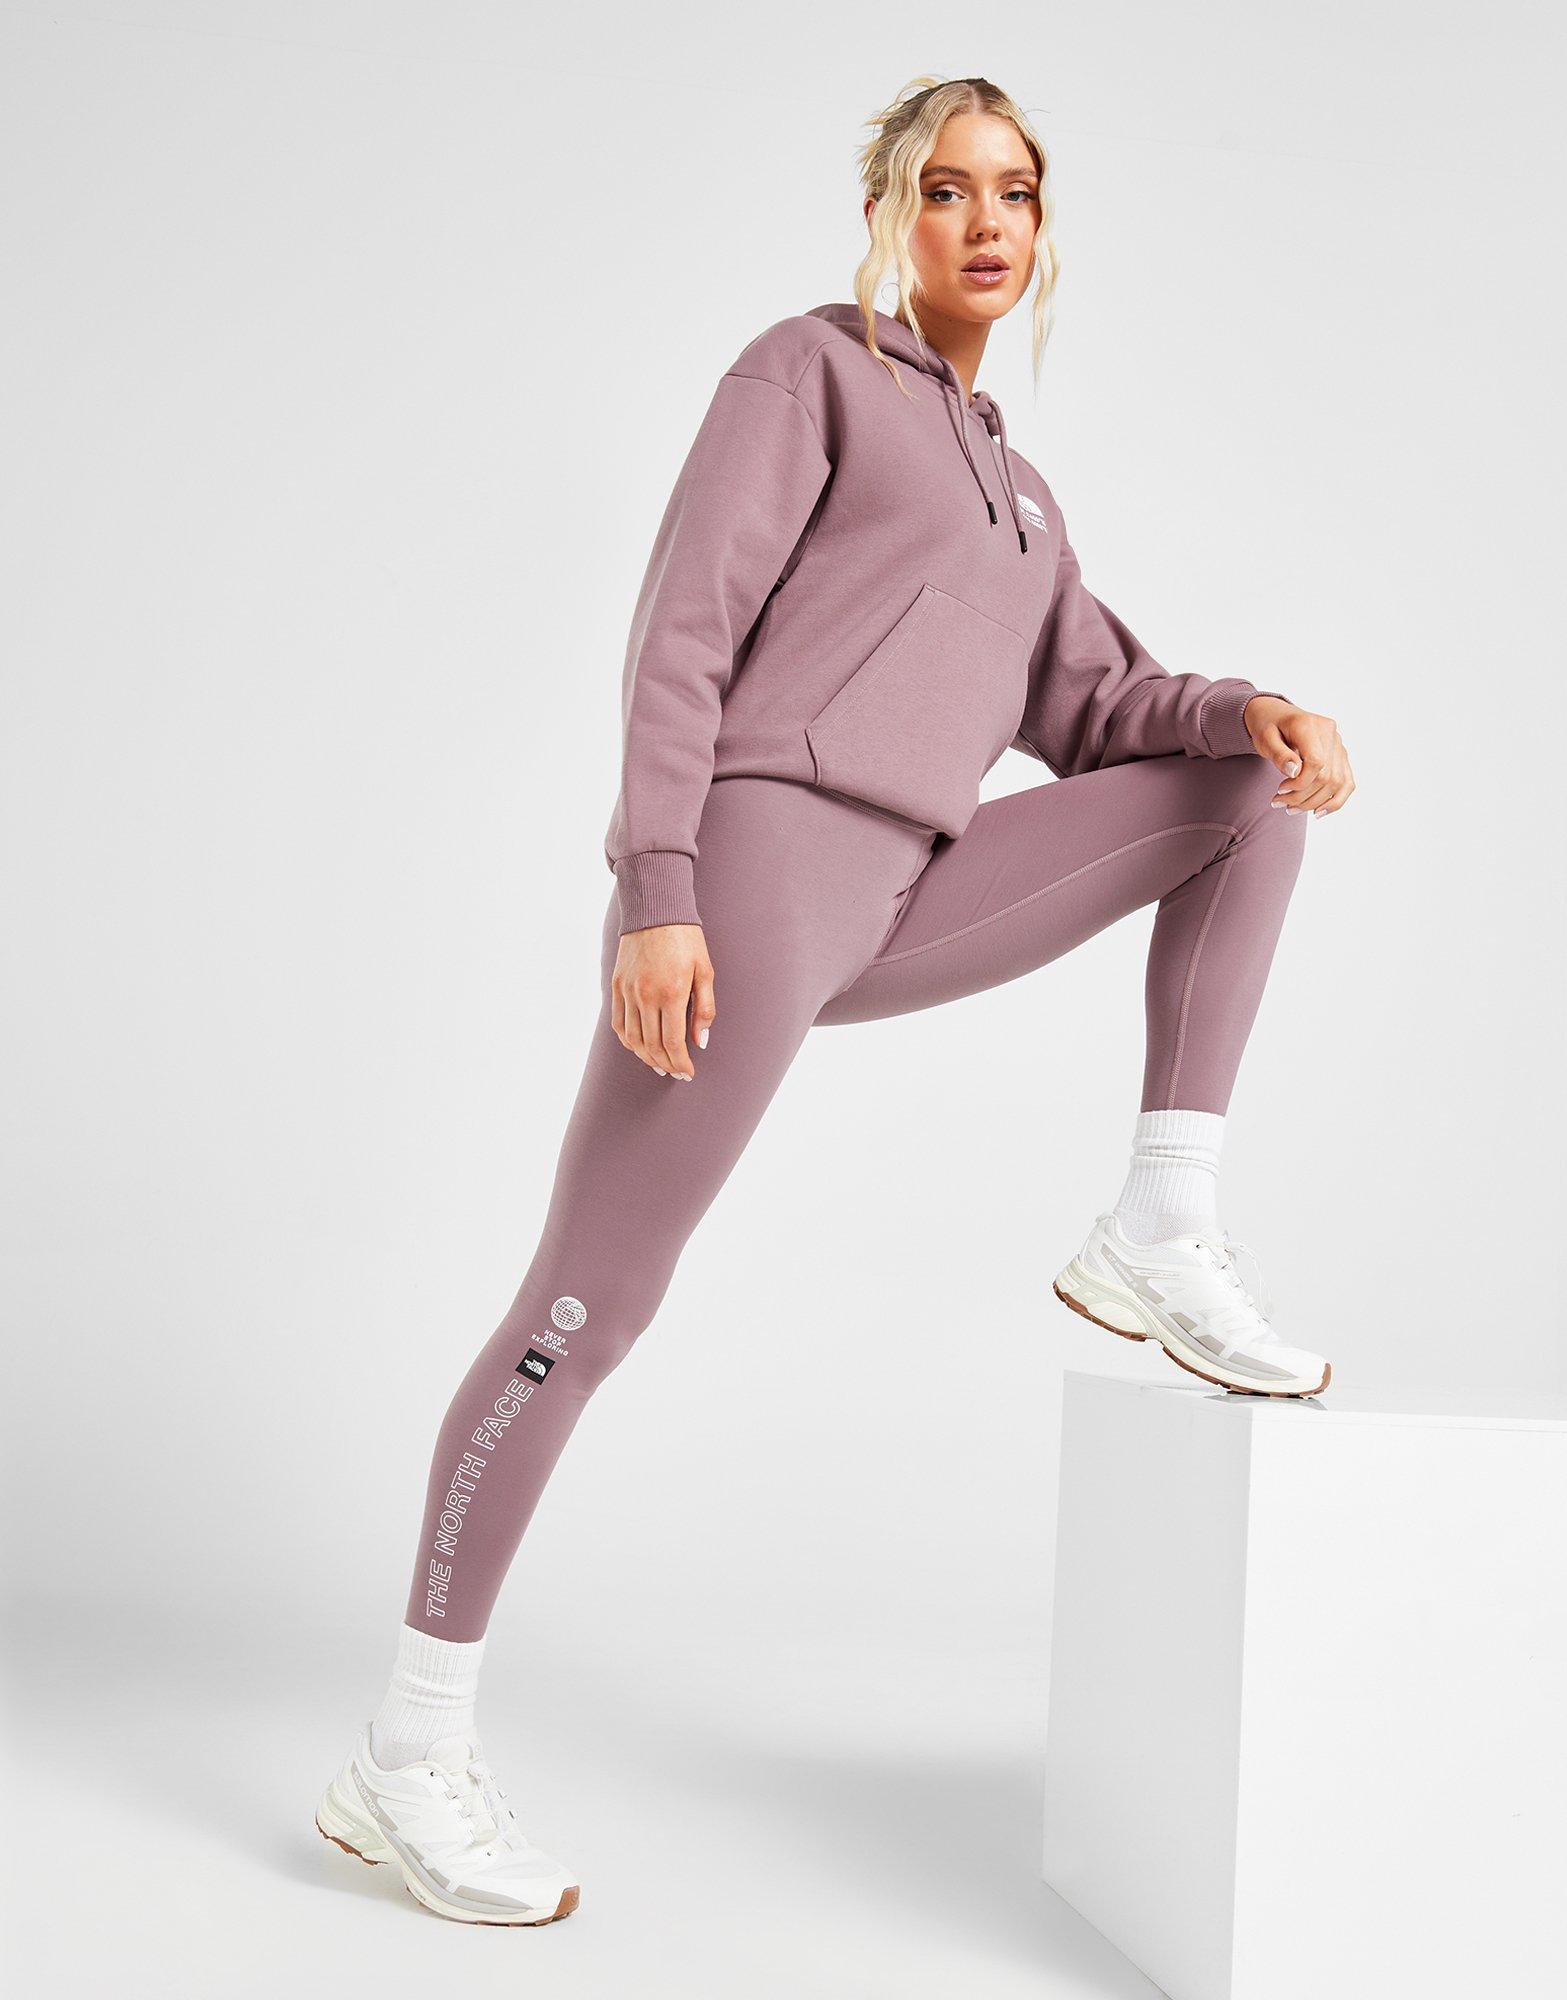 Grey The North Face Energy Coordinates Leggings